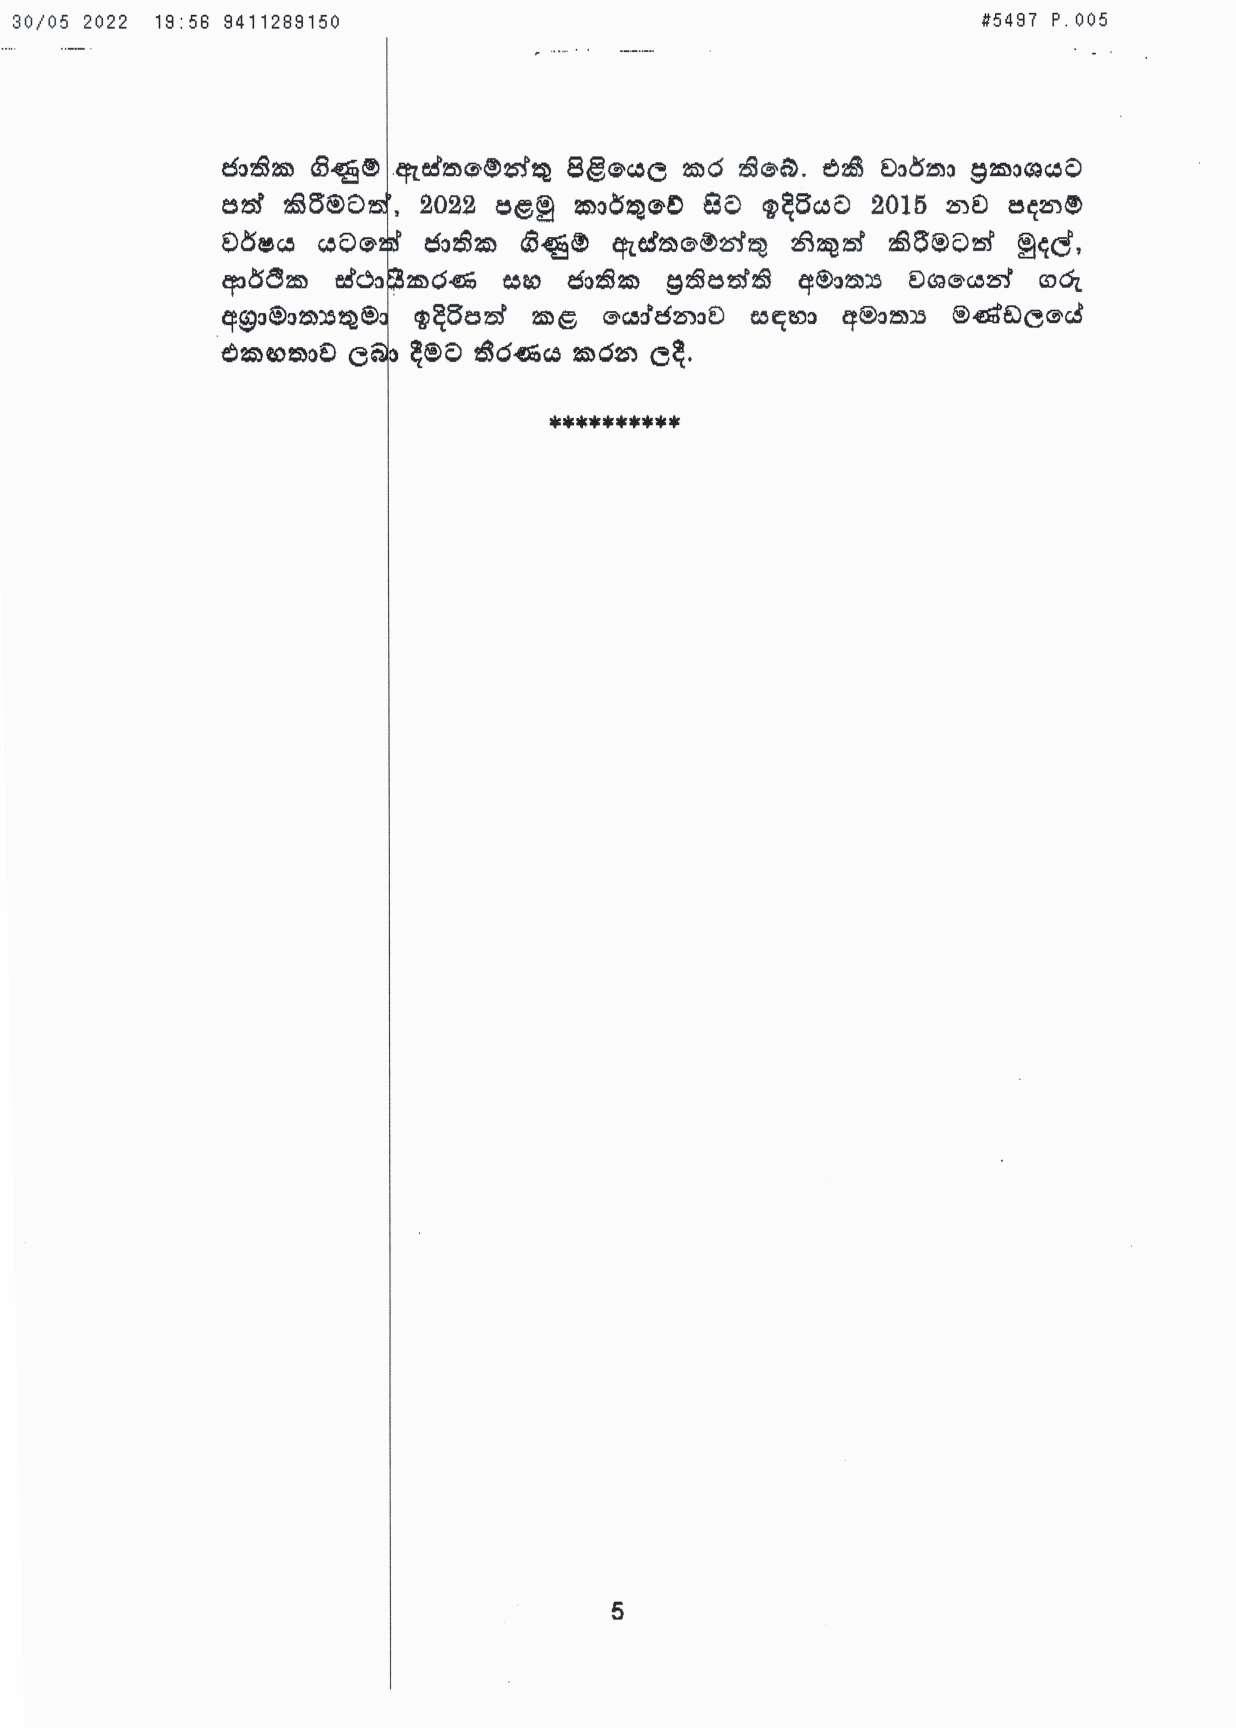 Cabinet Decisions on 30.05.2022 S page 005